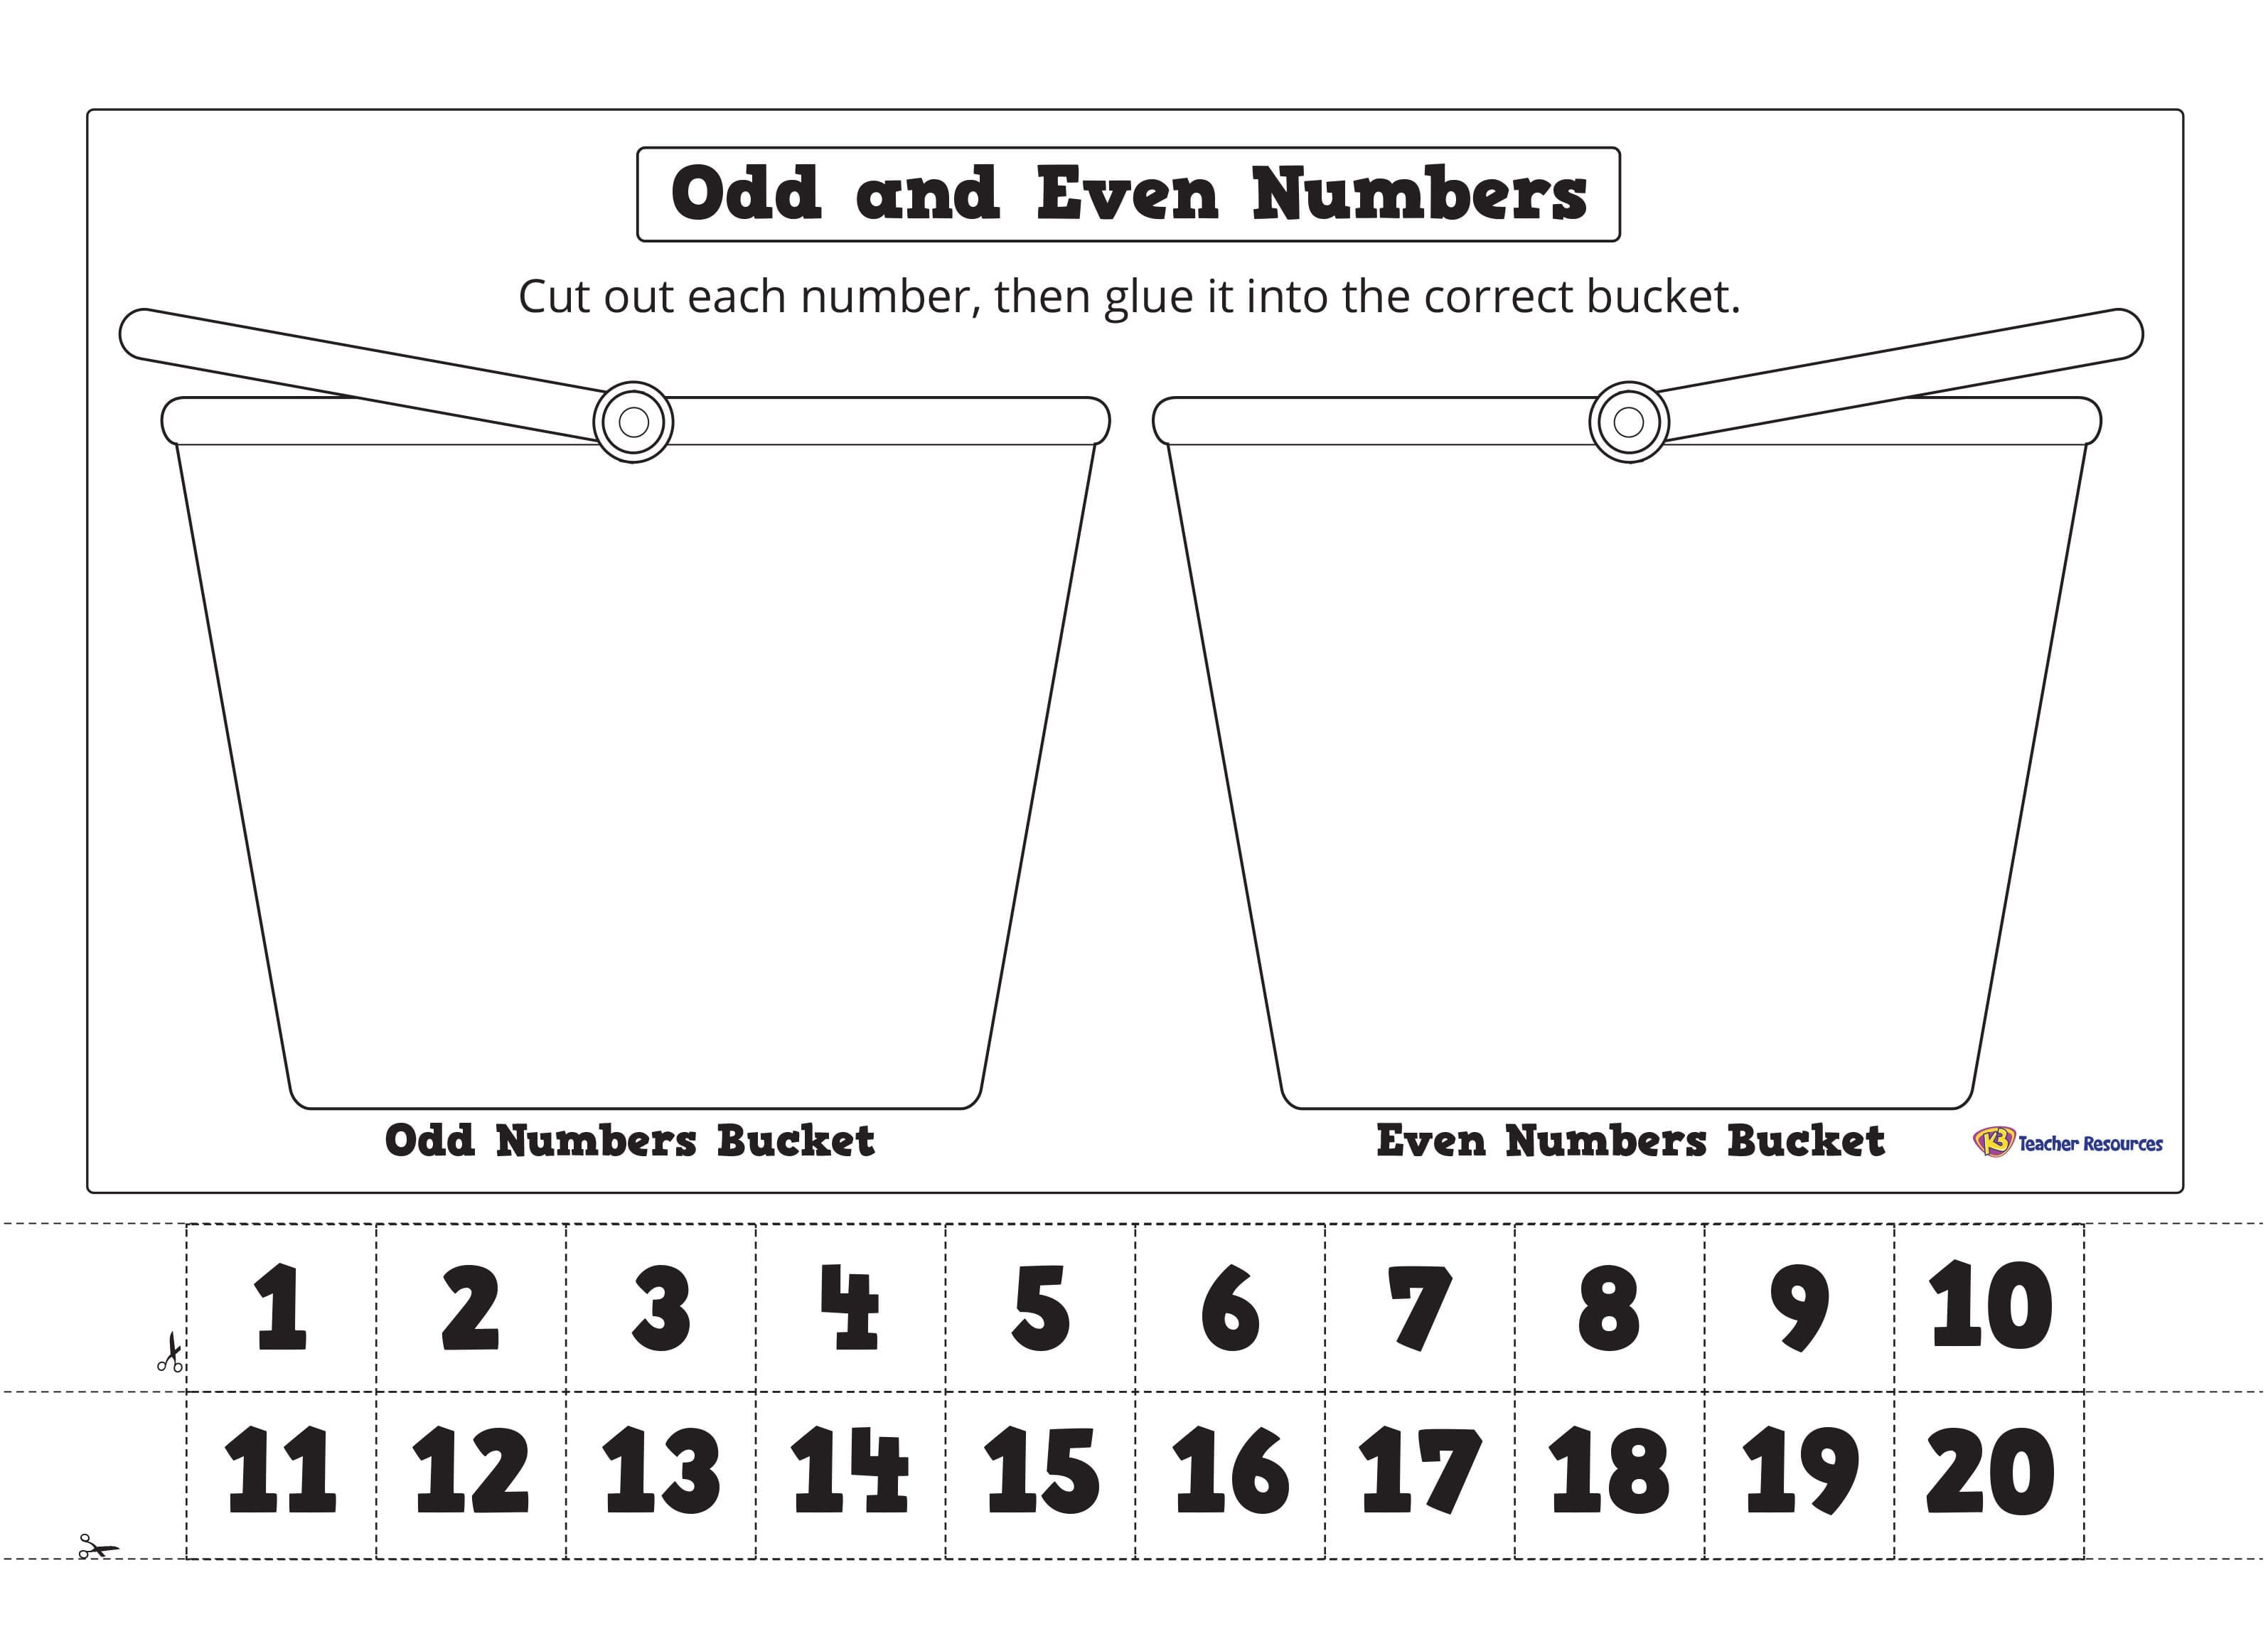 odd-and-even-numbers-worksheets-db-excel